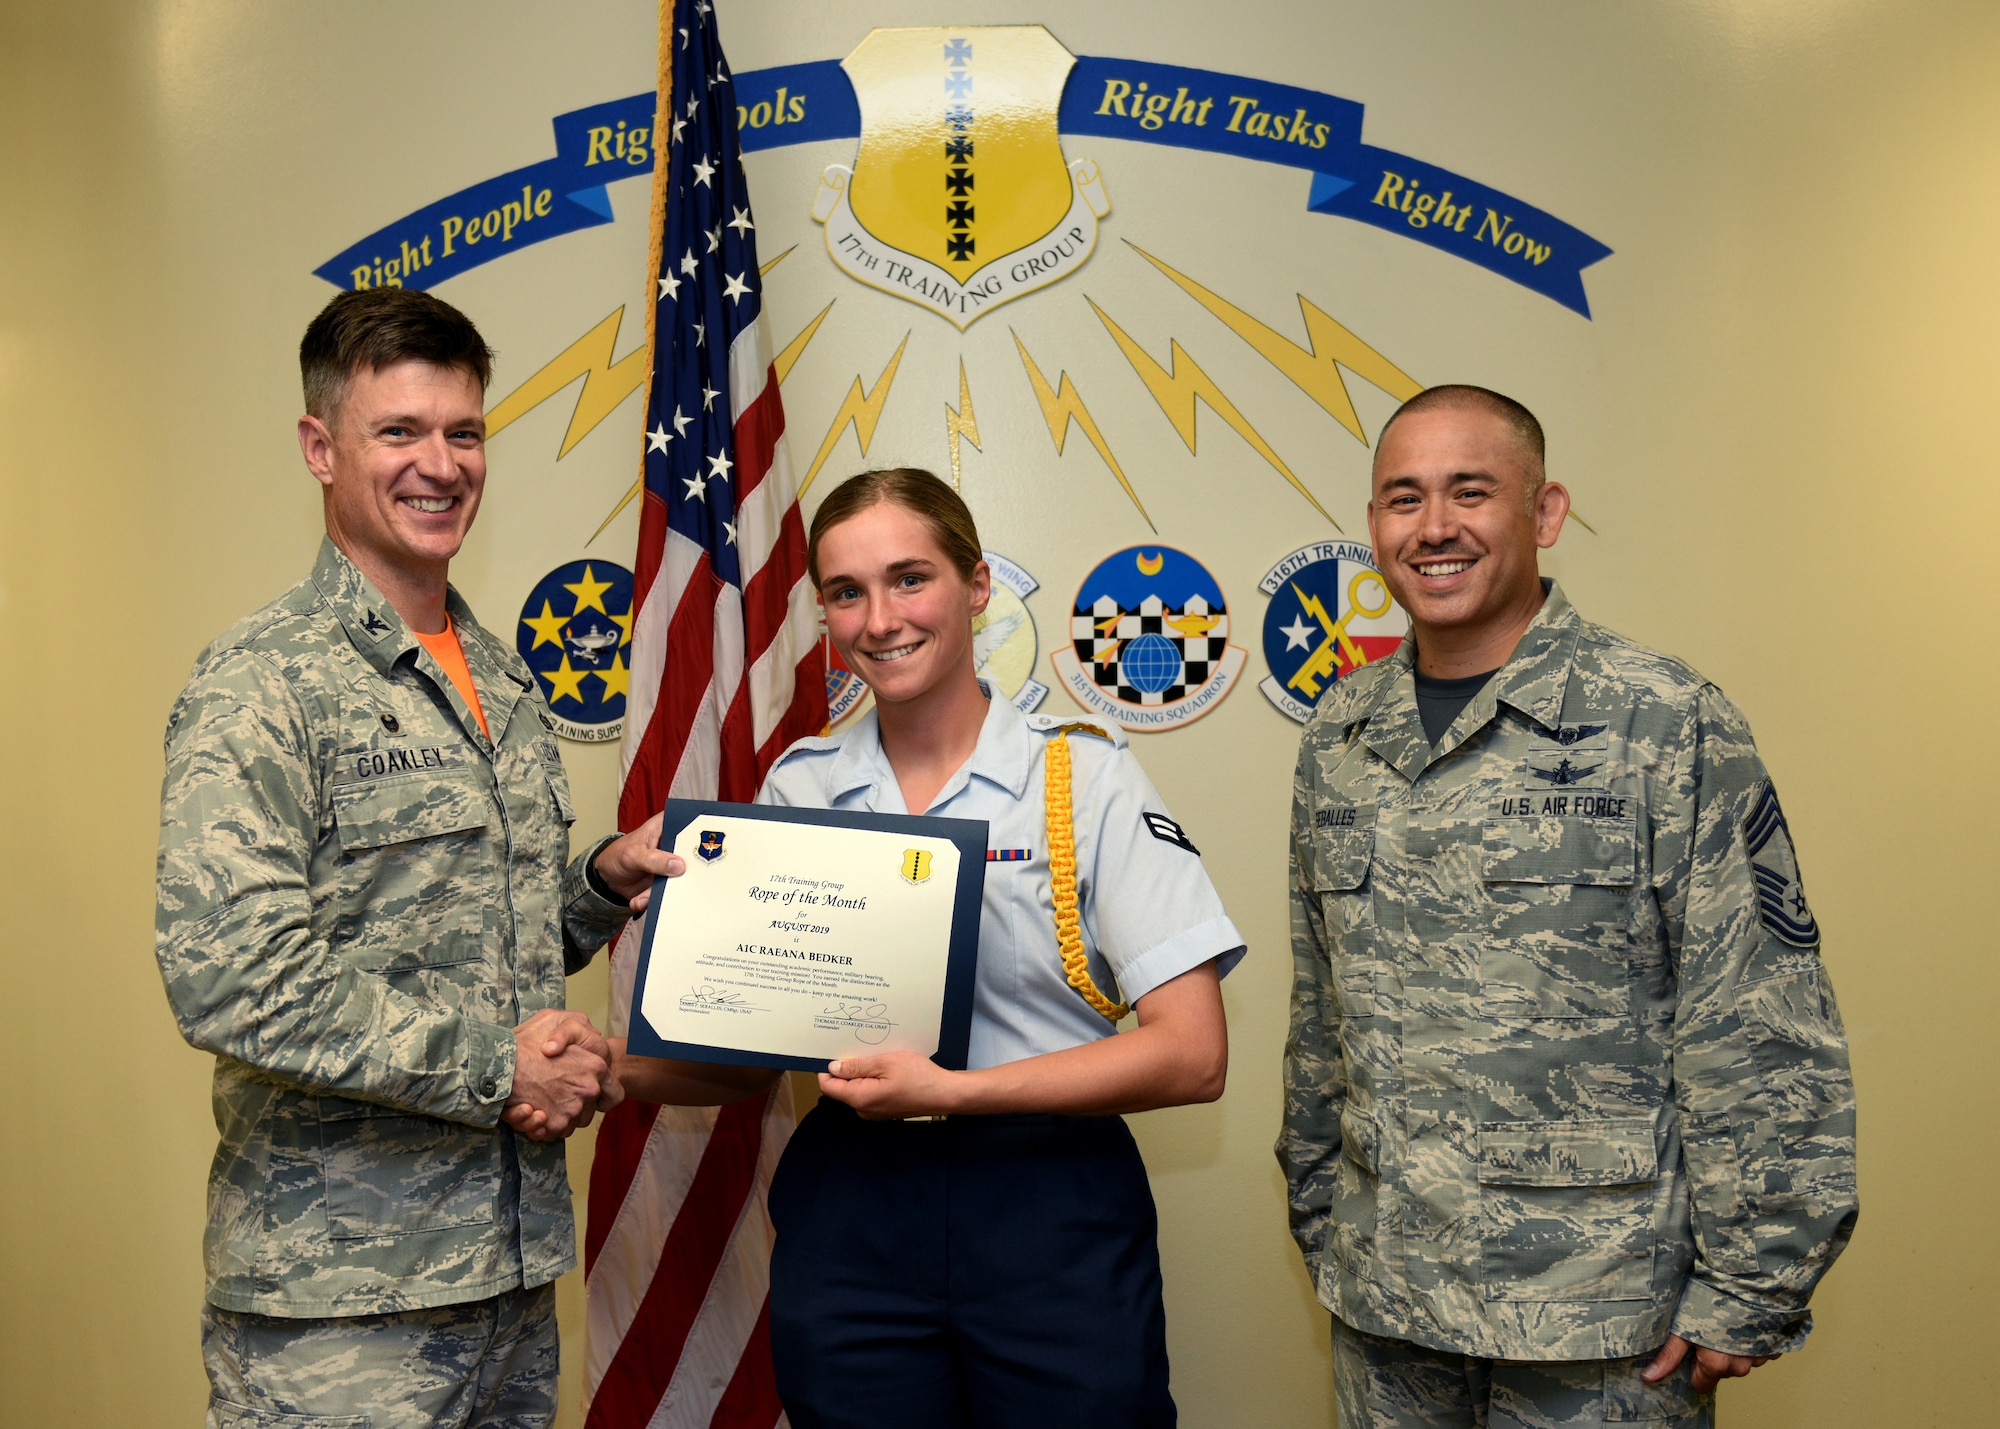 U.S. Air Force Col. Thomas Coakley, 17th Training Group commander, presents the 17th TRG Rope of the Month award to Airman 1st Class Raeana Bedker, 315th TRS student, at Brandenburg Hall on Goodfellow Air Force Base, Texas, September 6, 2019. Military Training Leaders present ropes to Airmen who display exceptional leadership qualities to lead their peers. (U.S. Air Force photo by Airman 1st Class Robyn Hunsinger/Released)